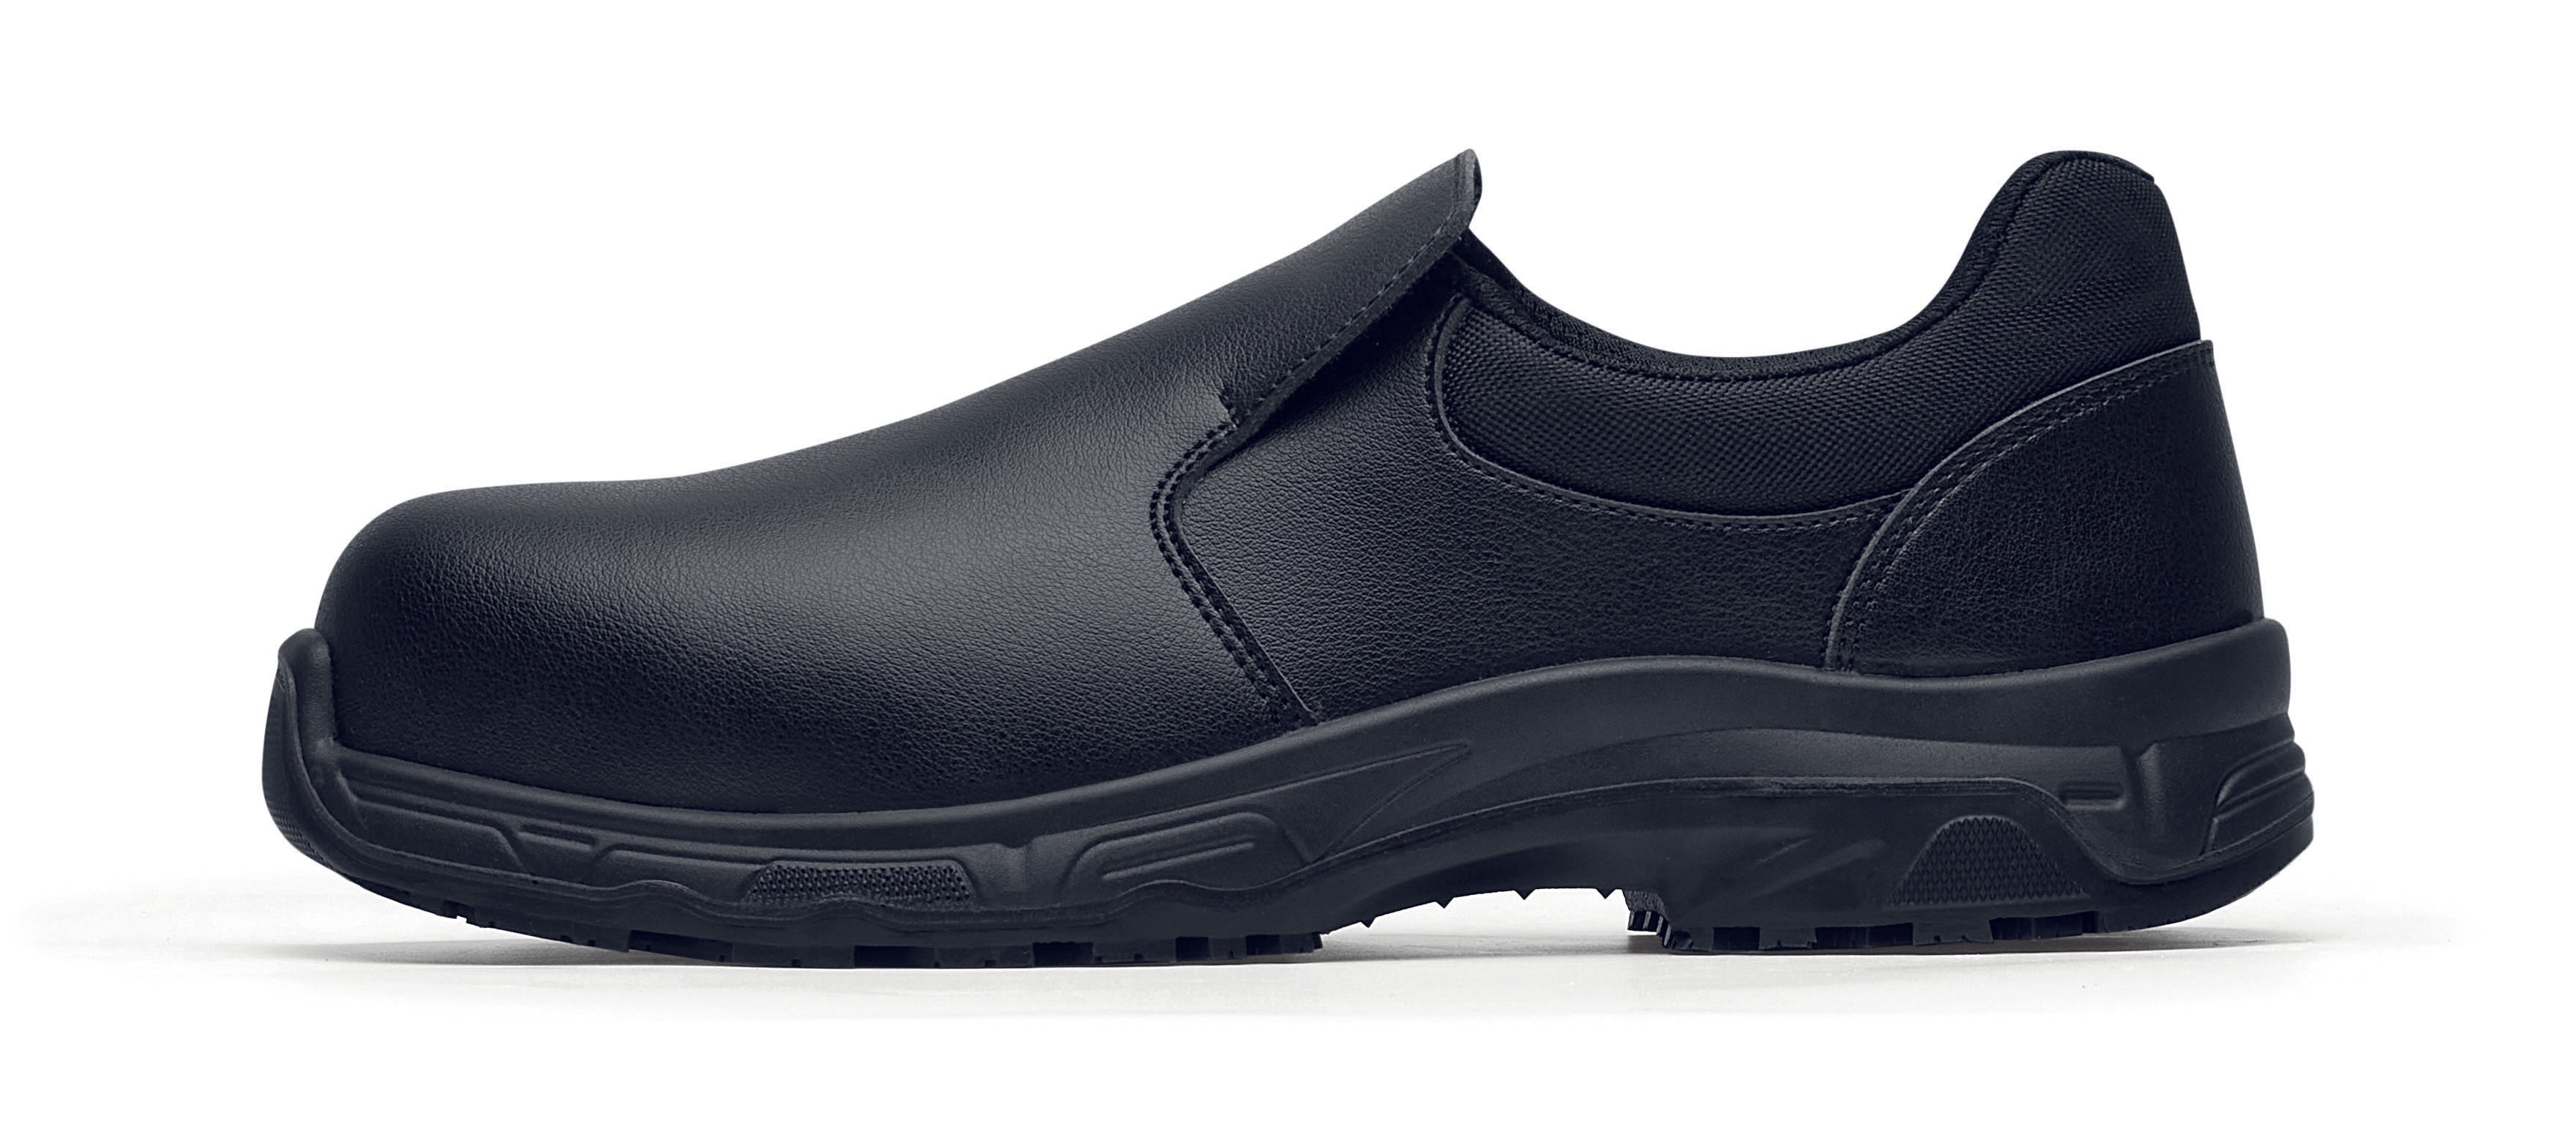 The Catania Black from Shoes For Crews, made in Italy, is a slip-resistant shoe with a composite safety toe cap and a puncture-resistant midsole, seen from the left.